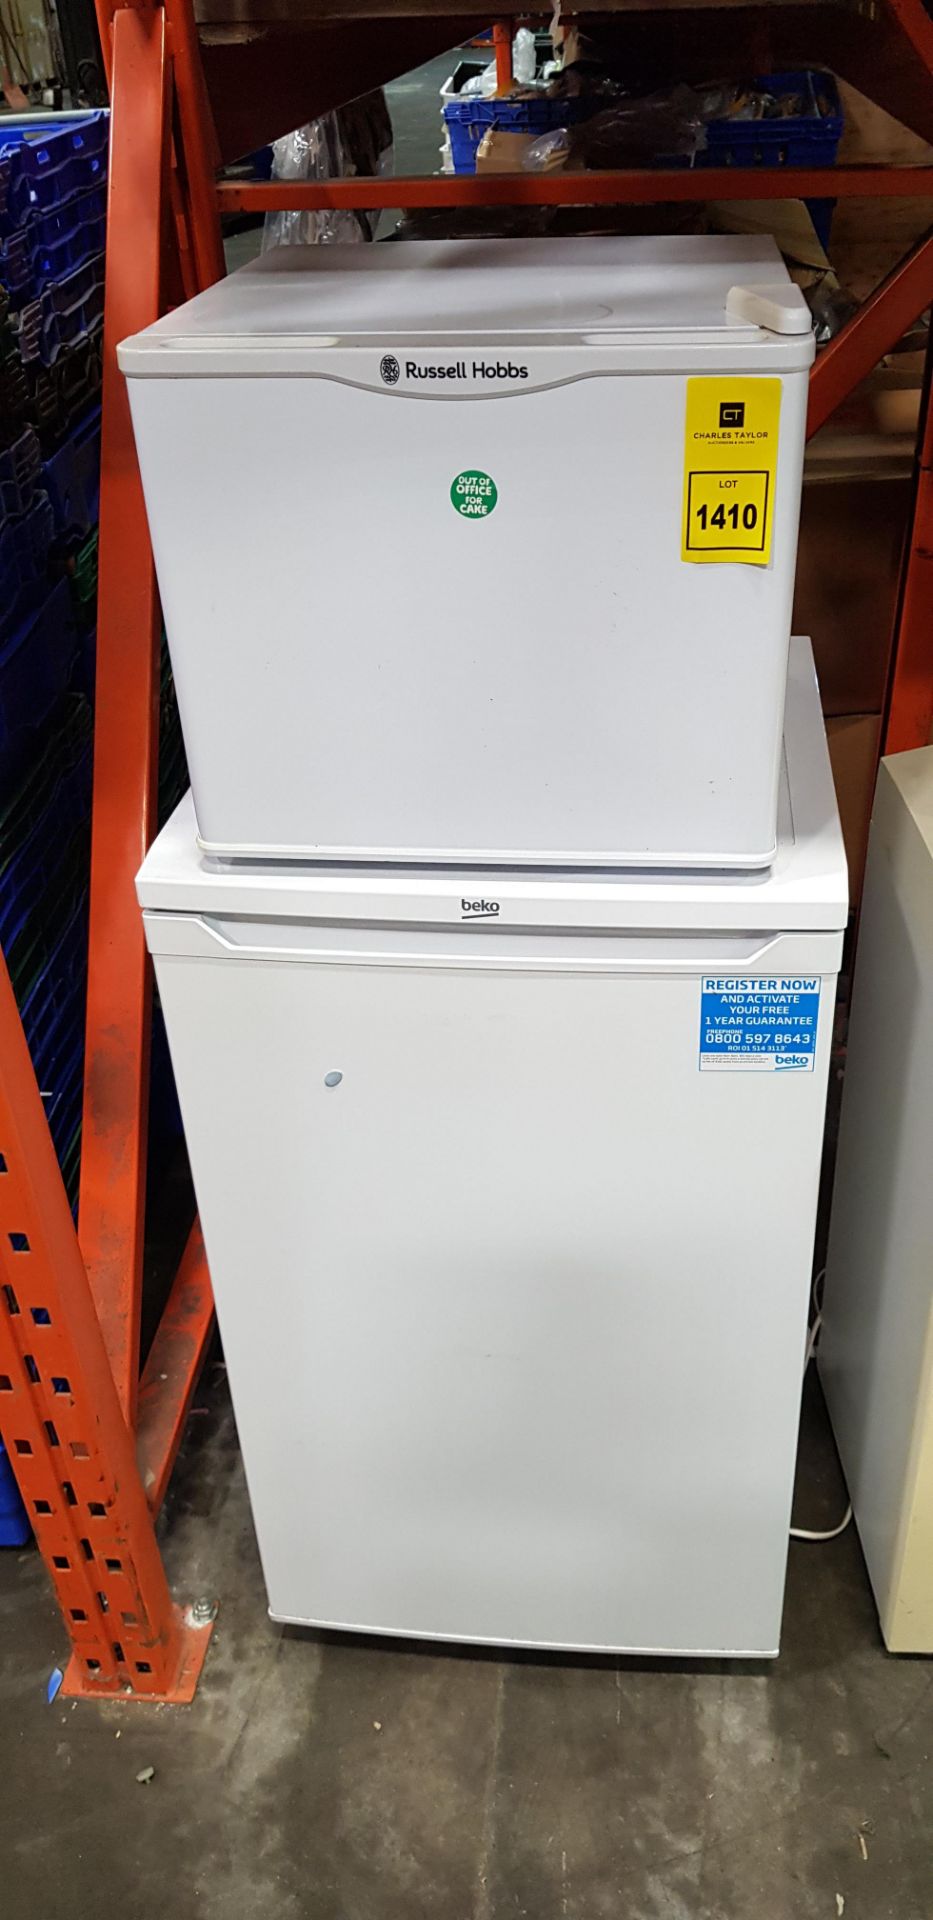 2 X MIXED LOT TO INCLUDE 1 X BEKO FRIDGE 1 X RUSSEL HOBS THERMOELECTRIC COOLER (PLEASE NOTE CABLE